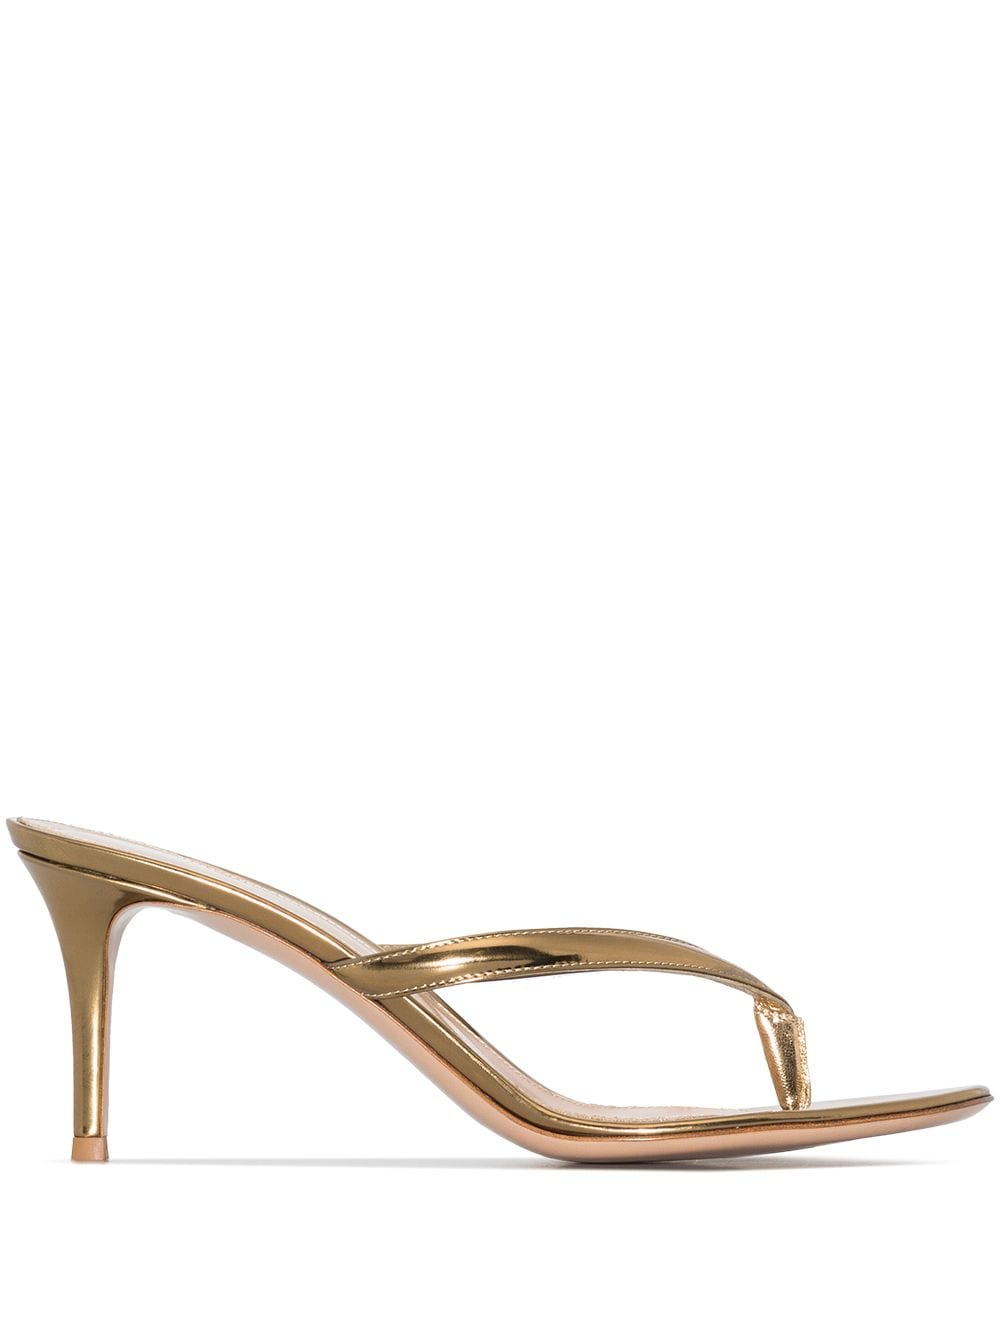 Gianvito Rossi Calypso 70mm Thong Mules In Gold